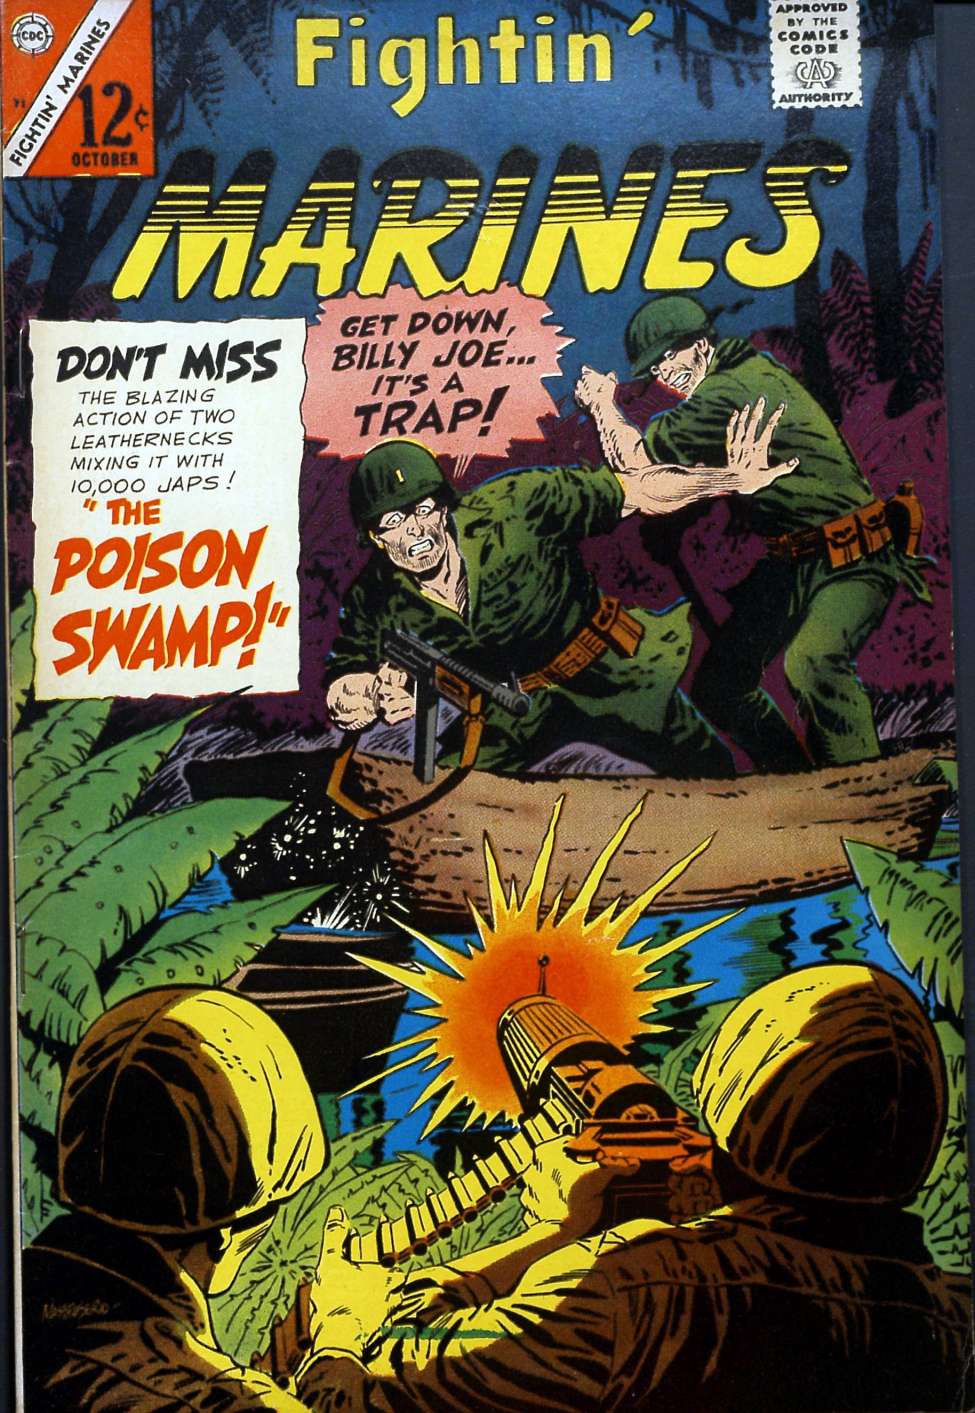 Book Cover For Fightin' Marines 71